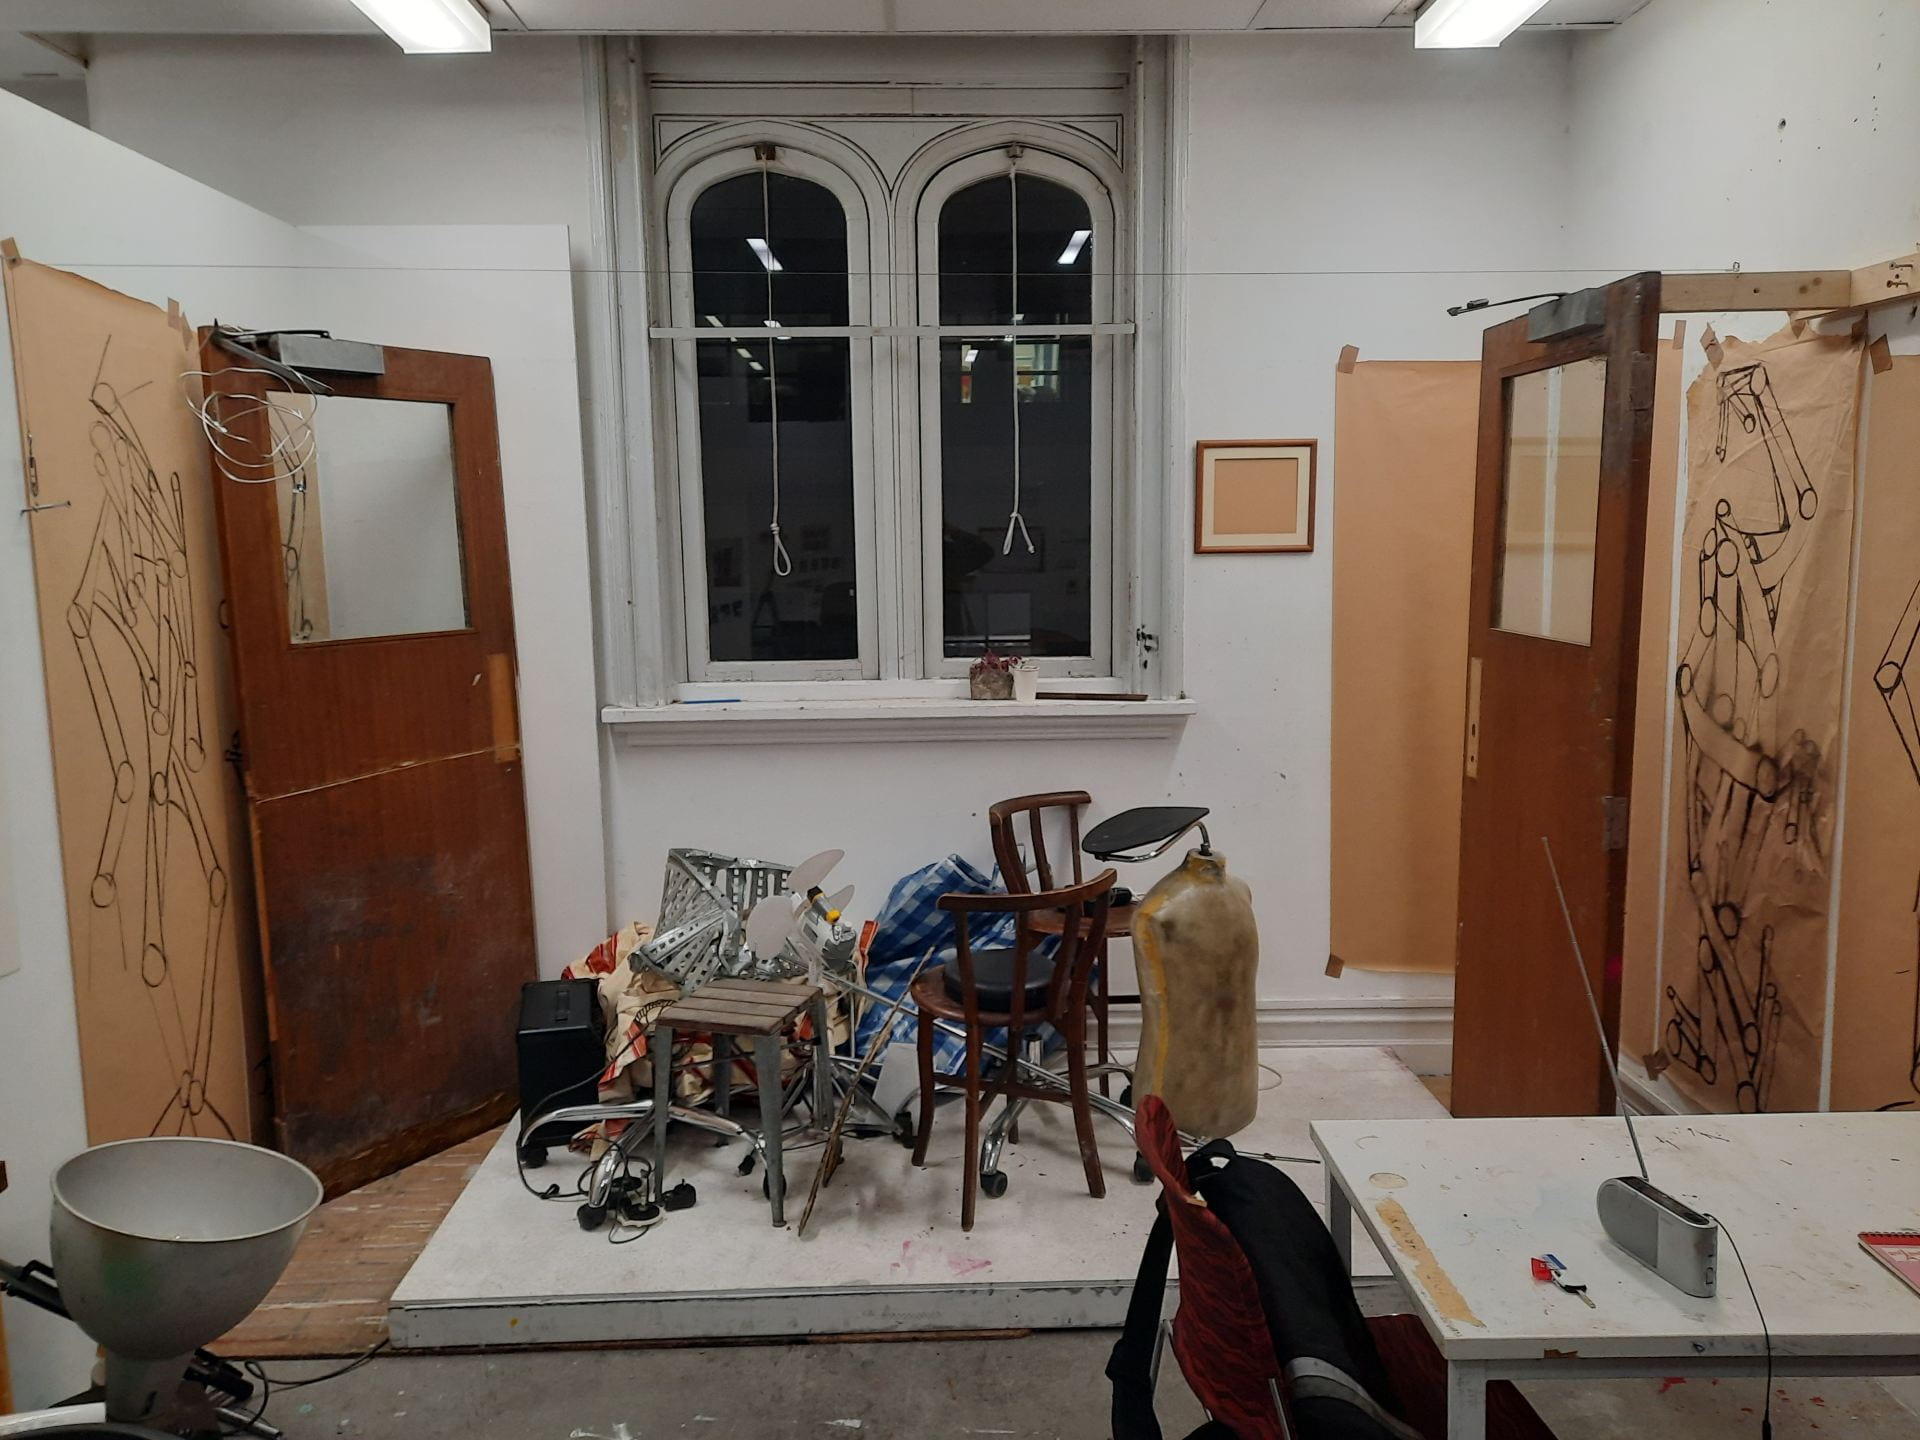 The studio holding the infinite potentiality of making